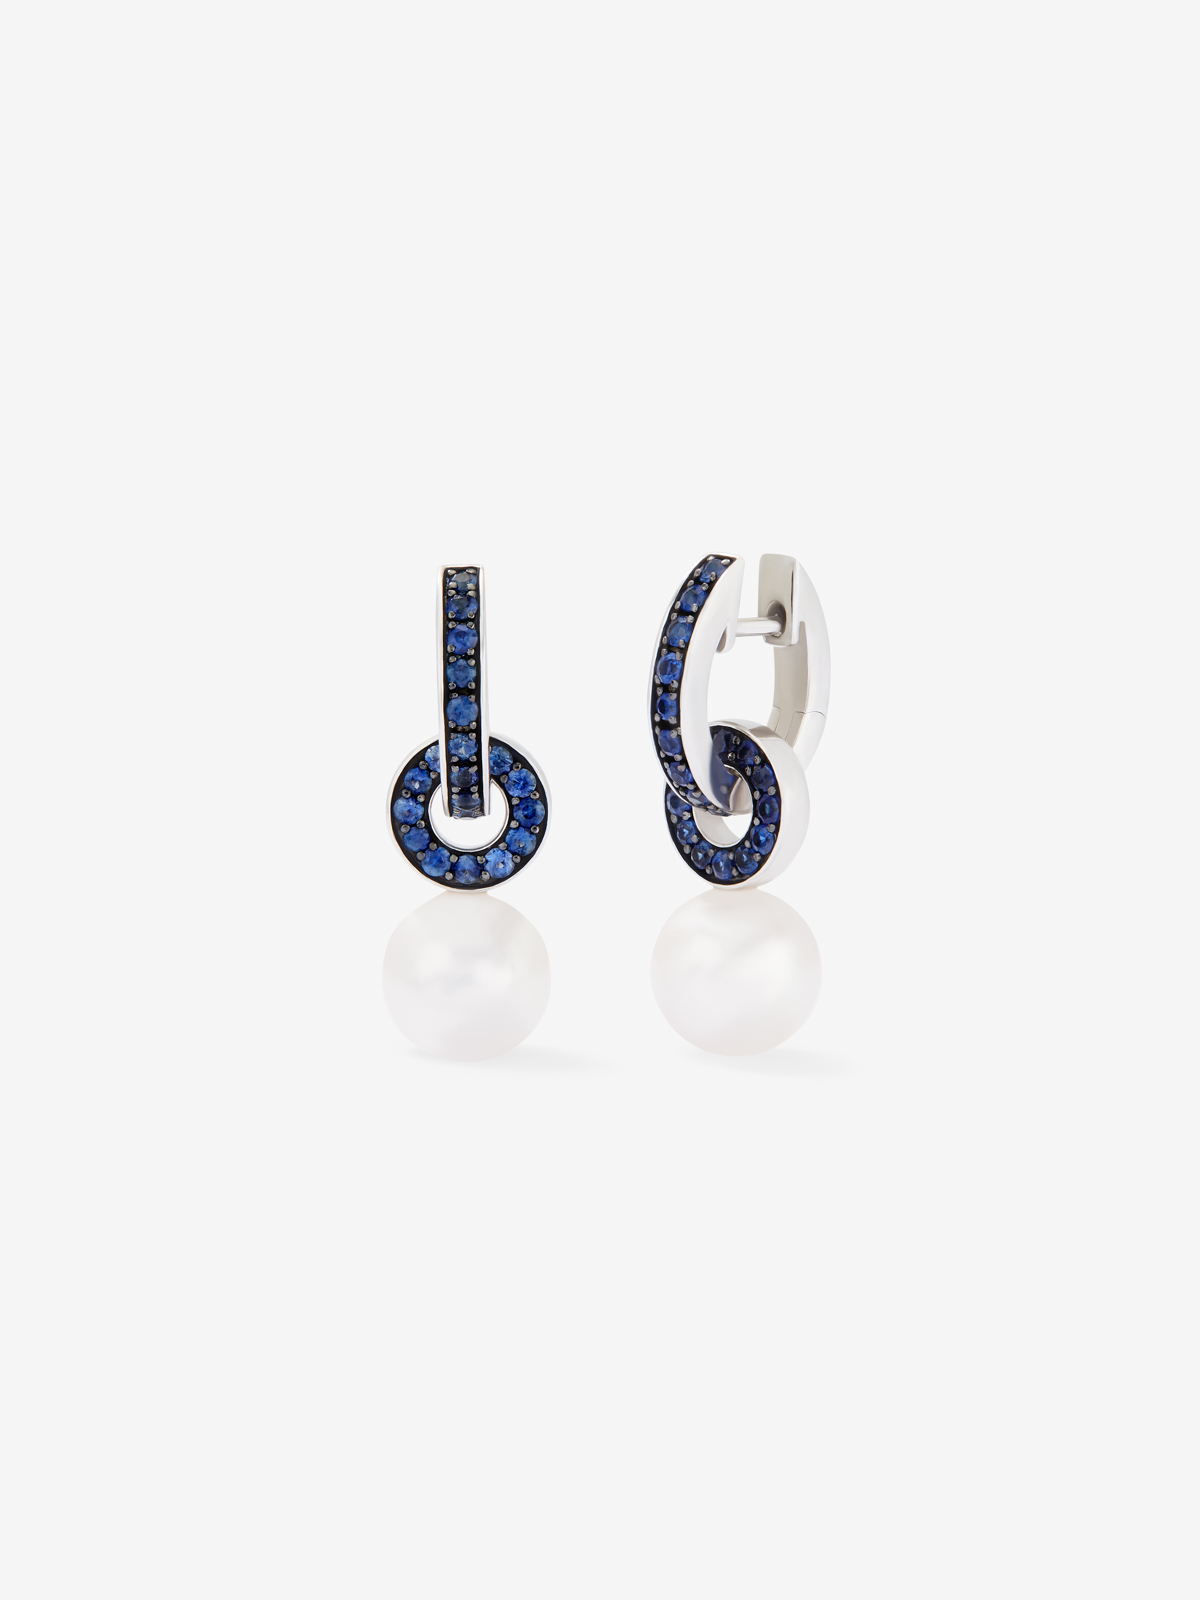 Double hoop earring made of 925 silver combined with an 8.5 mm Akoya pearl and sapphire.